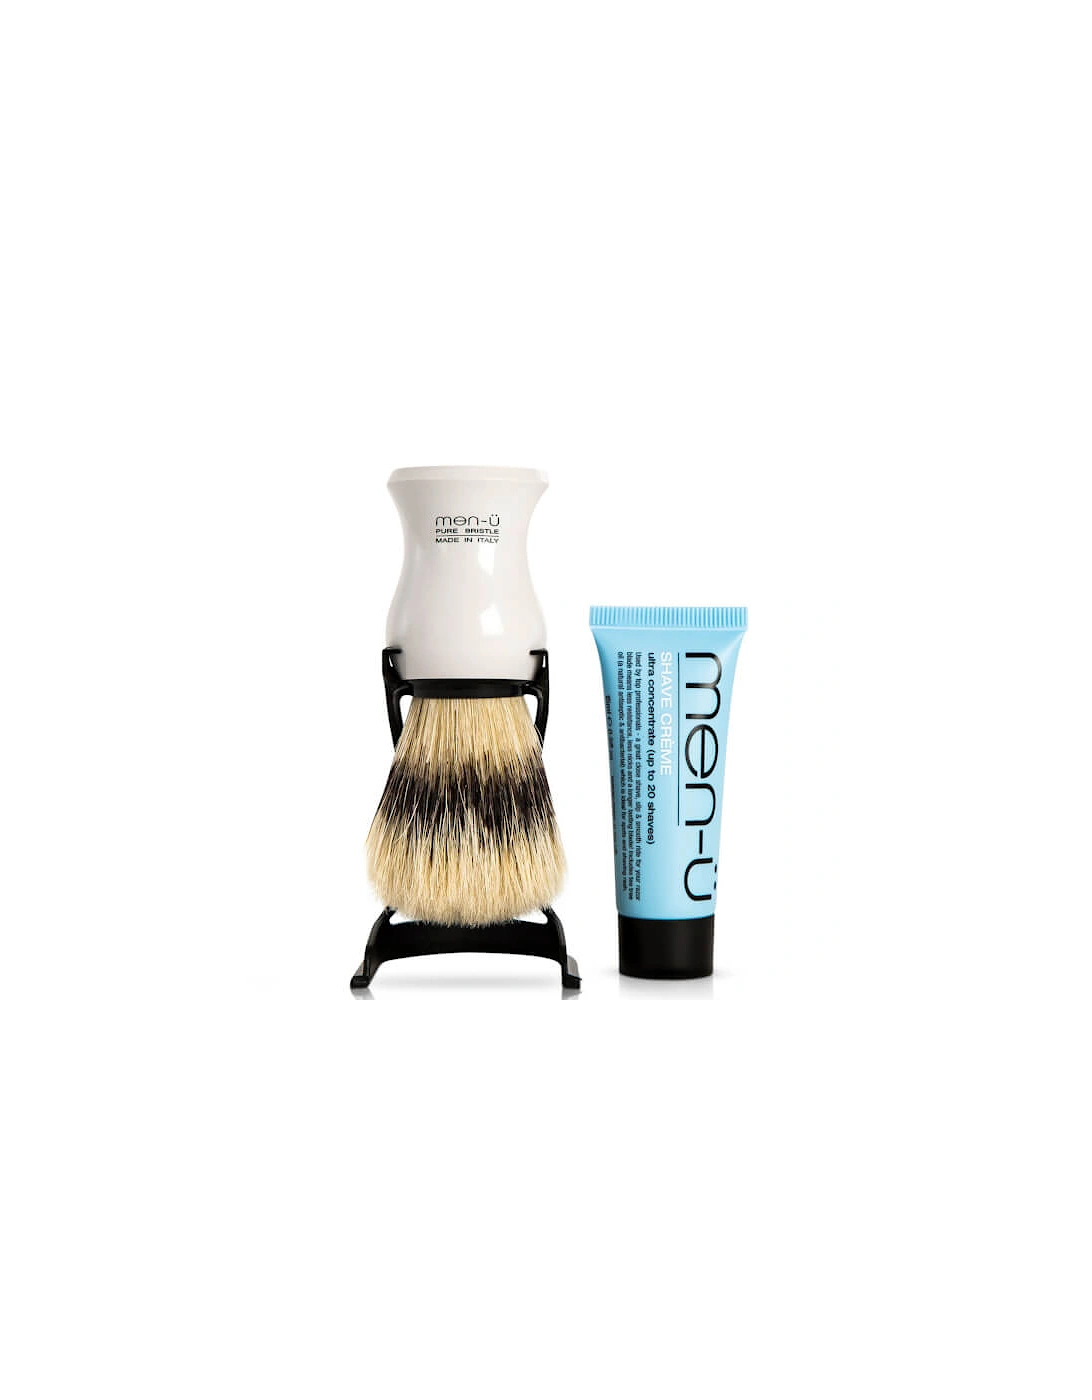 men-ü Barbiere Shave Brush and Stand - White - men-u - men-ü Barbiere Shave Brush and Stand - White - Doops - men-ü Barbiere Shave Brush and Stand - White - Paul - Barbiere Shaving Brush and Stand - White - Anonymous, 2 of 1